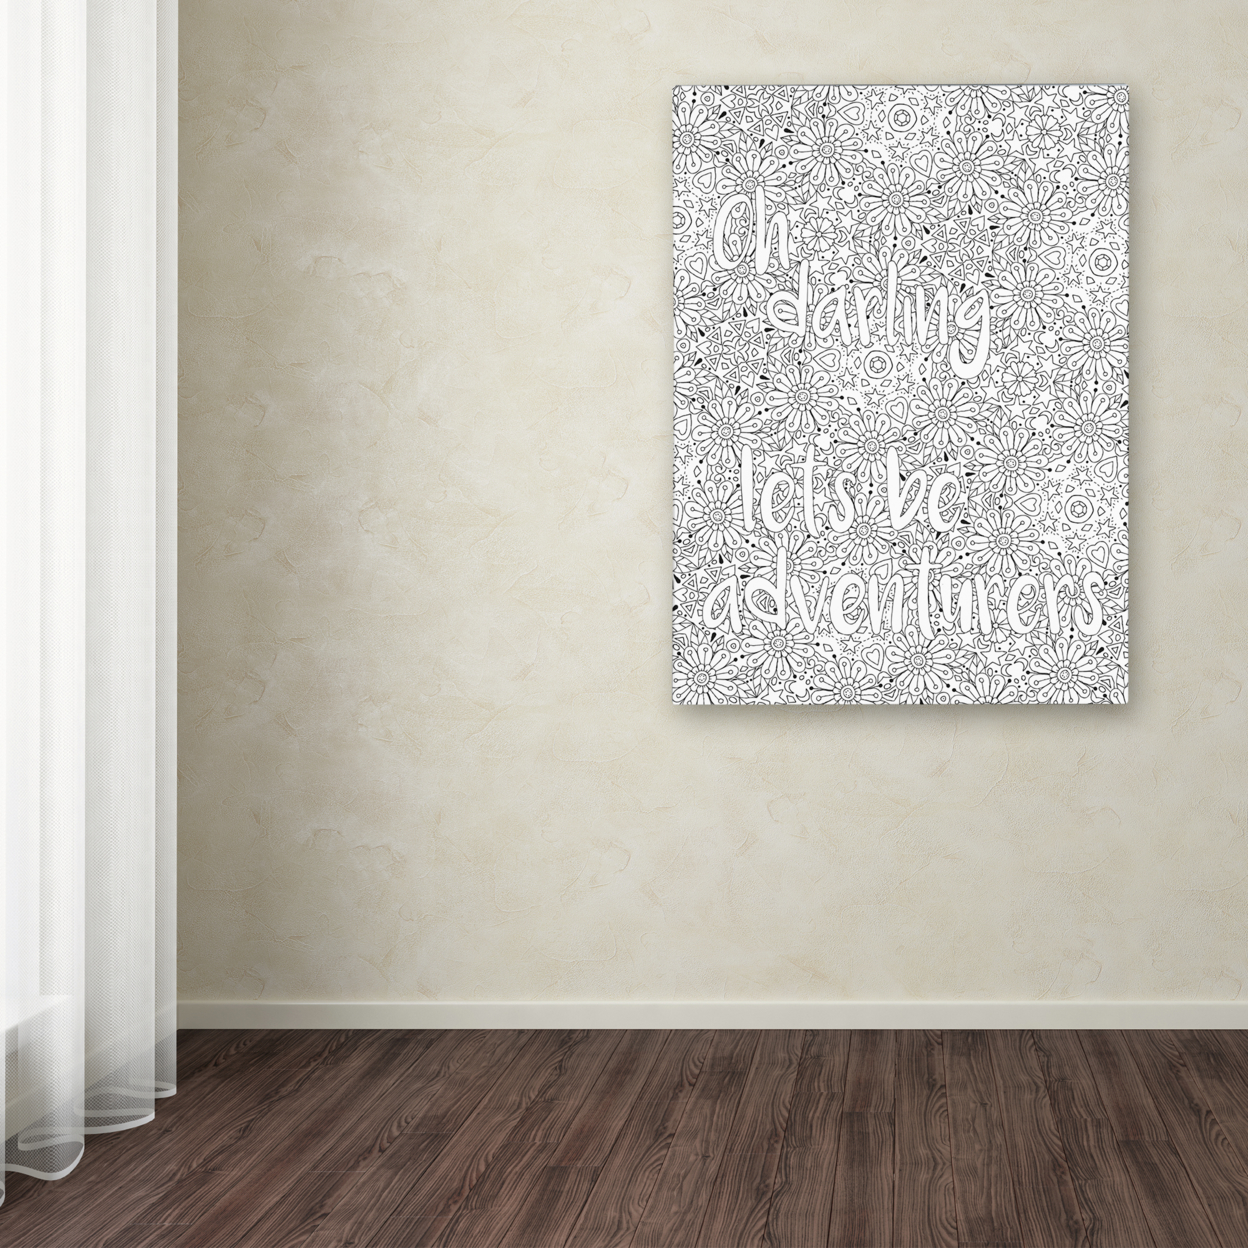 Hello Angel 'Inspirational Quotes 30' Canvas Art 18 X 24